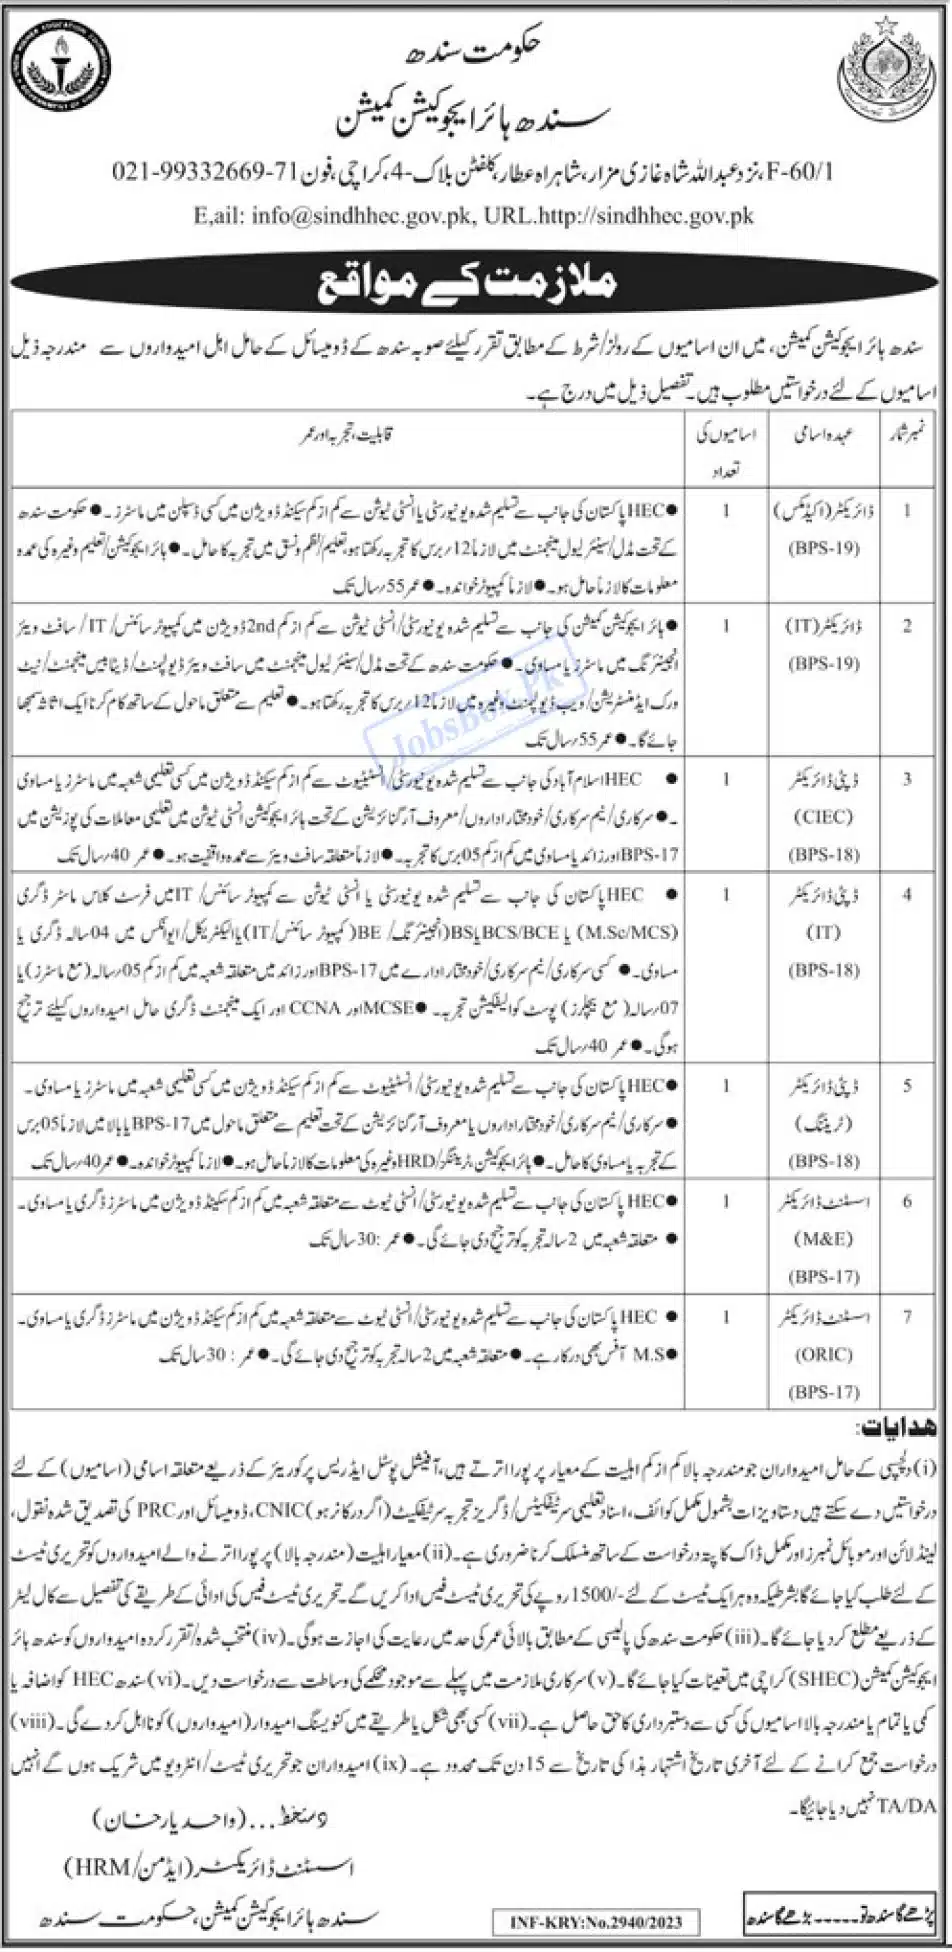 Sindh Higher Education Commission Jobs 2023 Current Openings